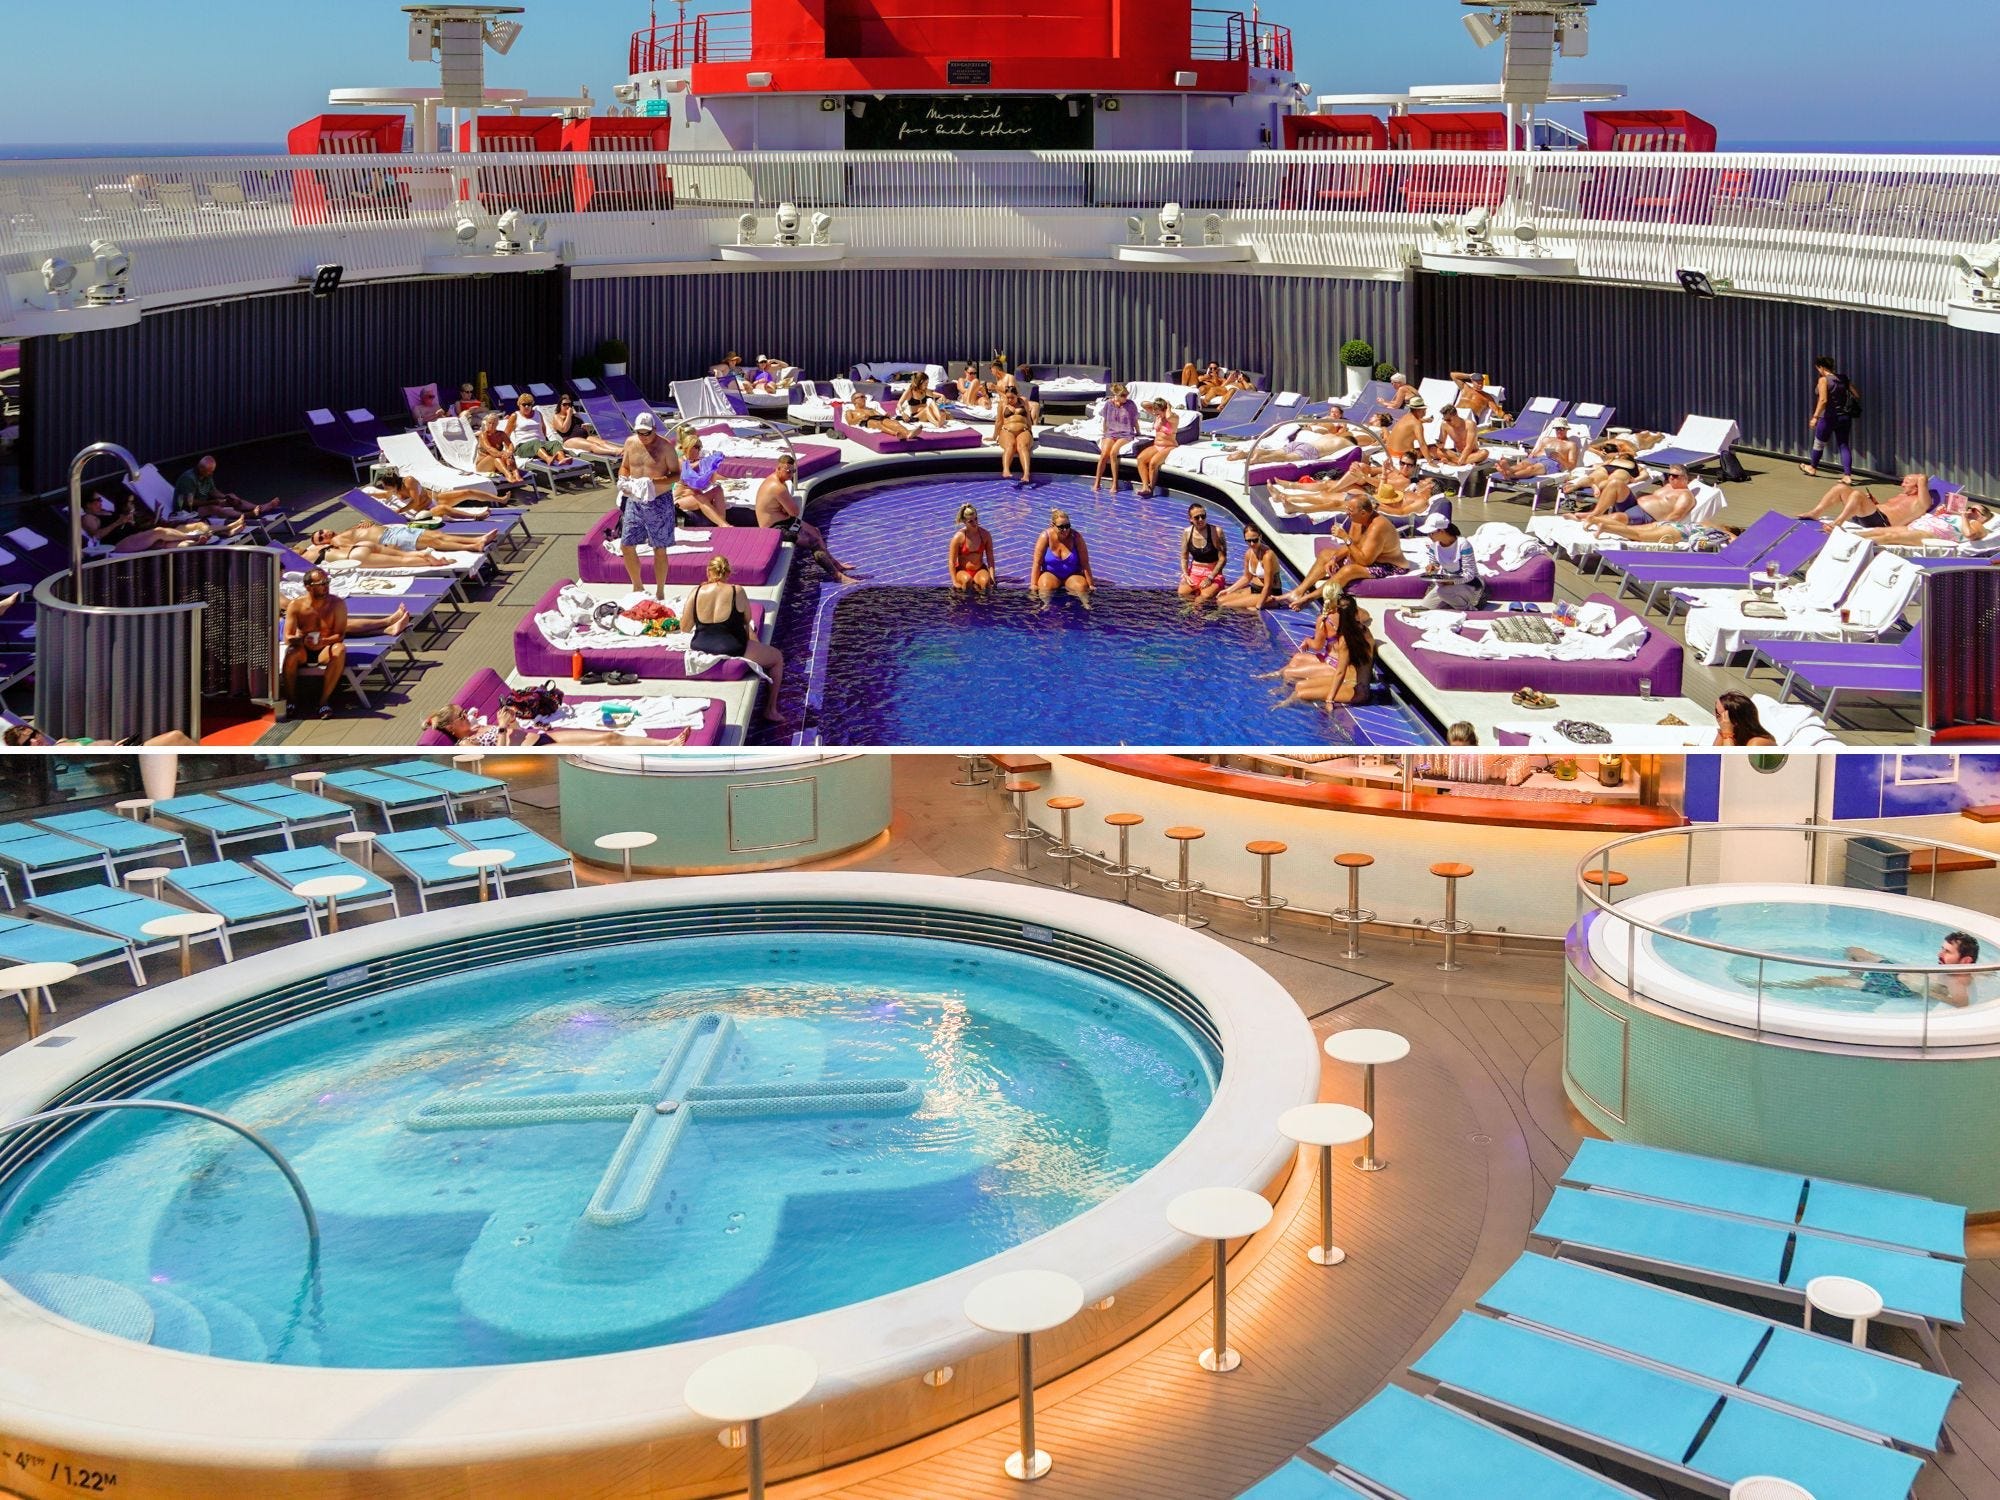 <p>The Aquatic Club is on deck 15 and has two pools separated by a bar — the main pool and the Well-Being Pool. </p><p>For a beach club vibe, I recommend the main pool because it's bigger and has music playing all the time. I was surprised to find that the pool felt relatively smaller than on a typical cruise ship, in my experience. But it was never too crowded to use — even in the afternoons — so this didn't bother me at all. </p><p>On the other side of the deck, The Well-Being Pool is smaller and has seating and jets in the water, so it felt to me like an extra-large whirlpool. But like the main pool, this one was never too crowded to go in either. And unlike the main pool, it was quiet, making it ideal for relaxing and cooling off. </p>